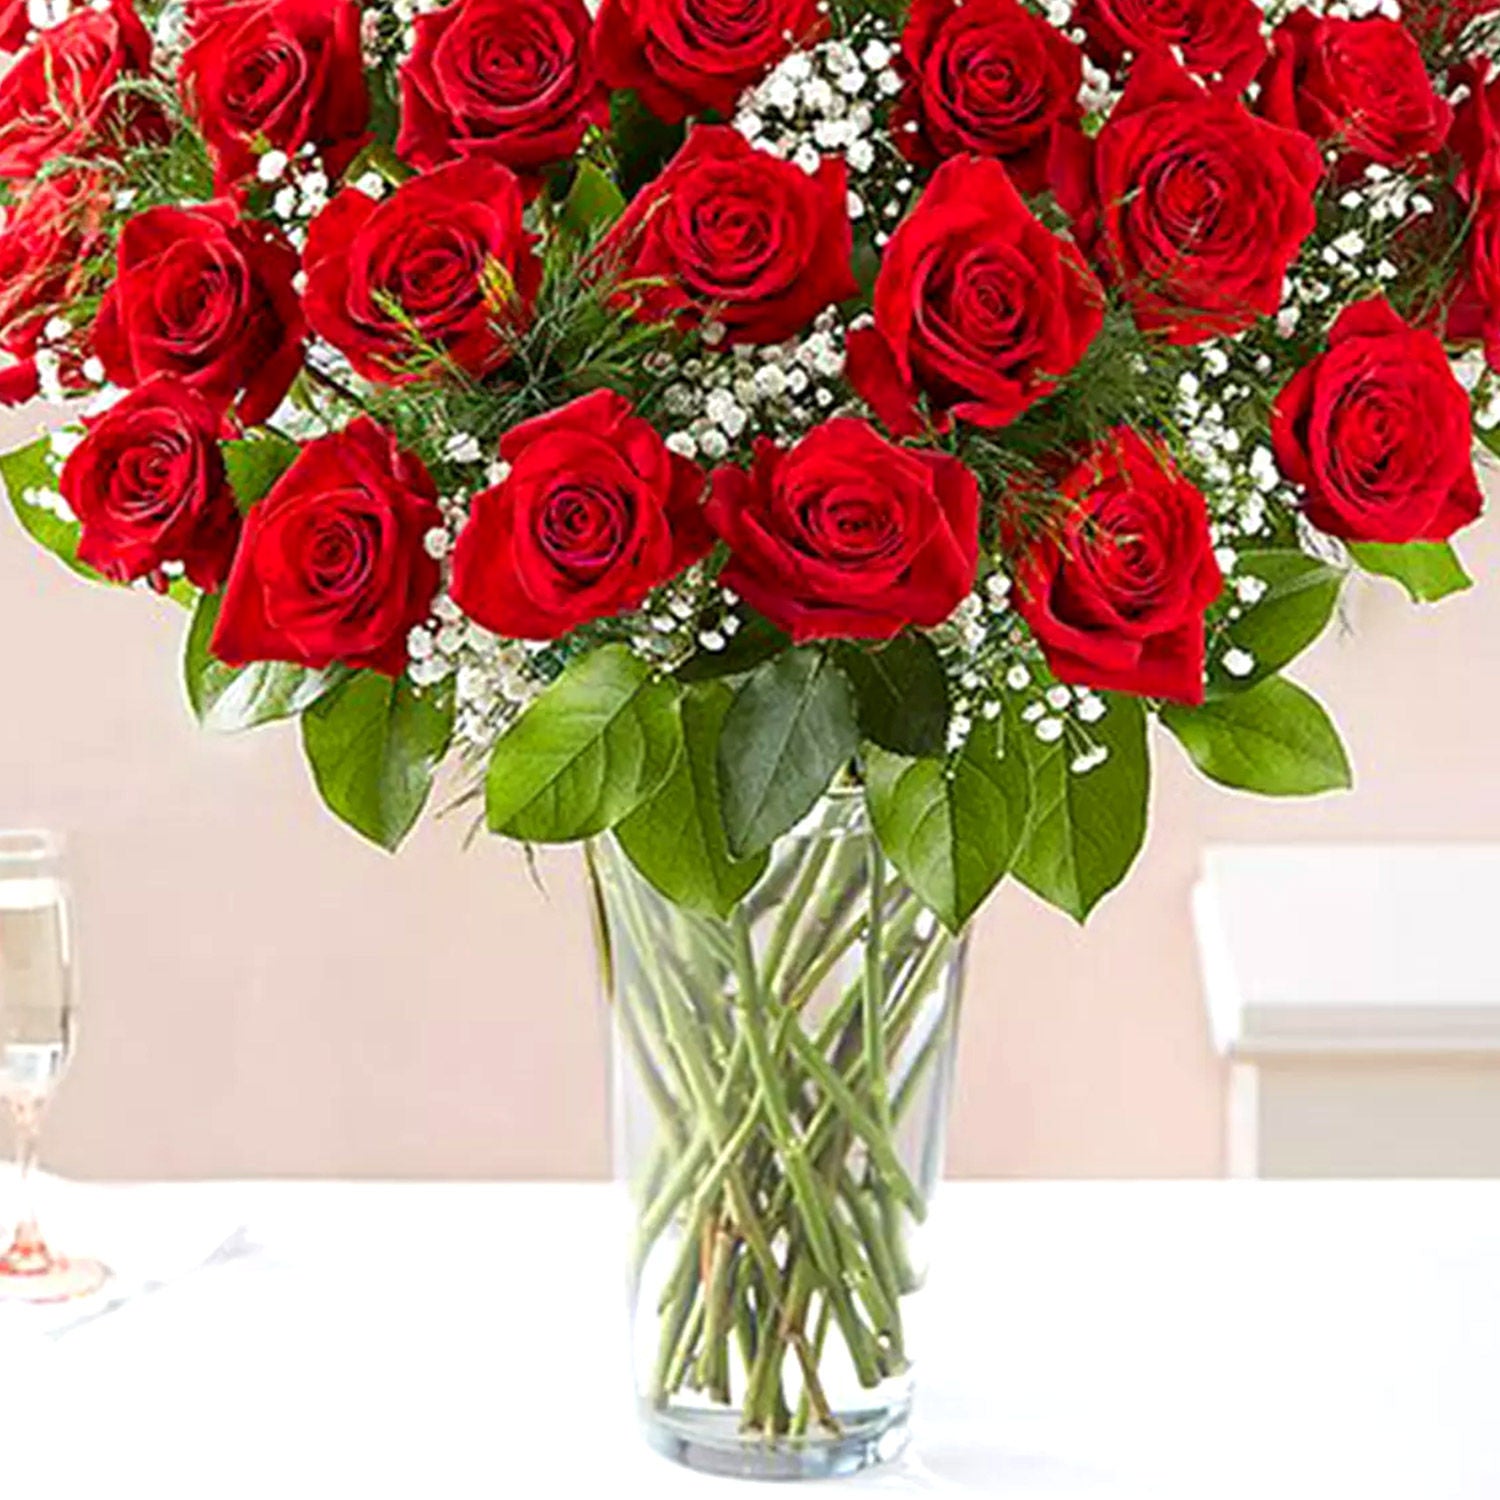 Bunch of 50 Scarlet Red Roses